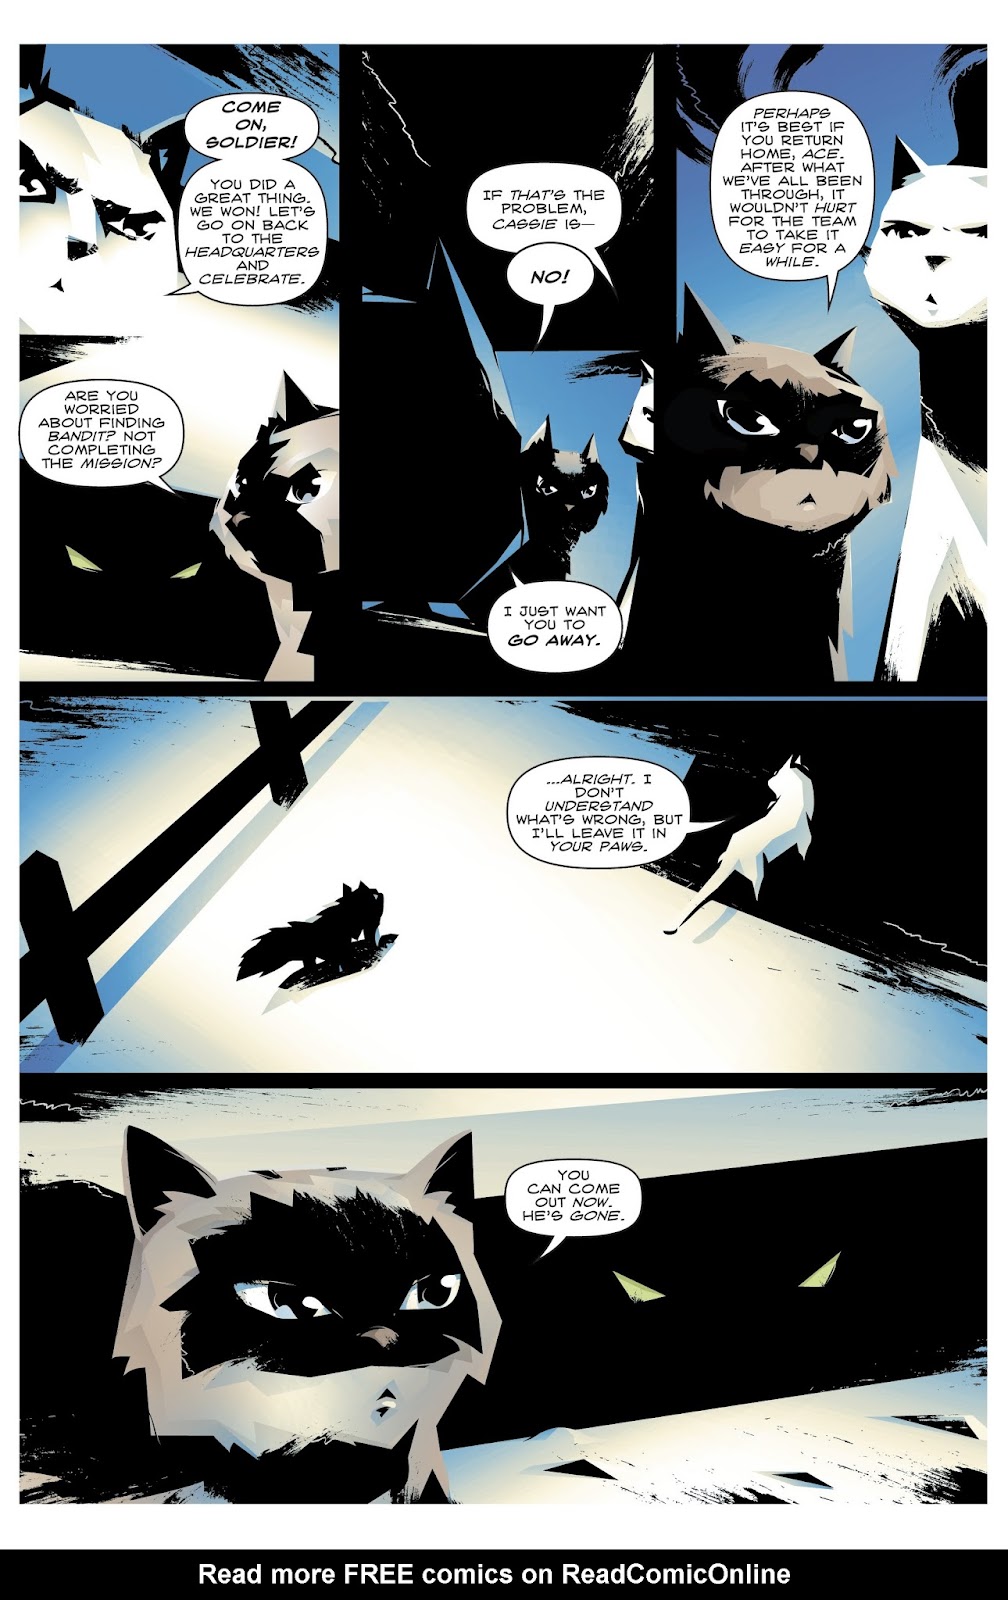 Hero Cats: Midnight Over Stellar City Vol. 2 issue 3 - Page 11